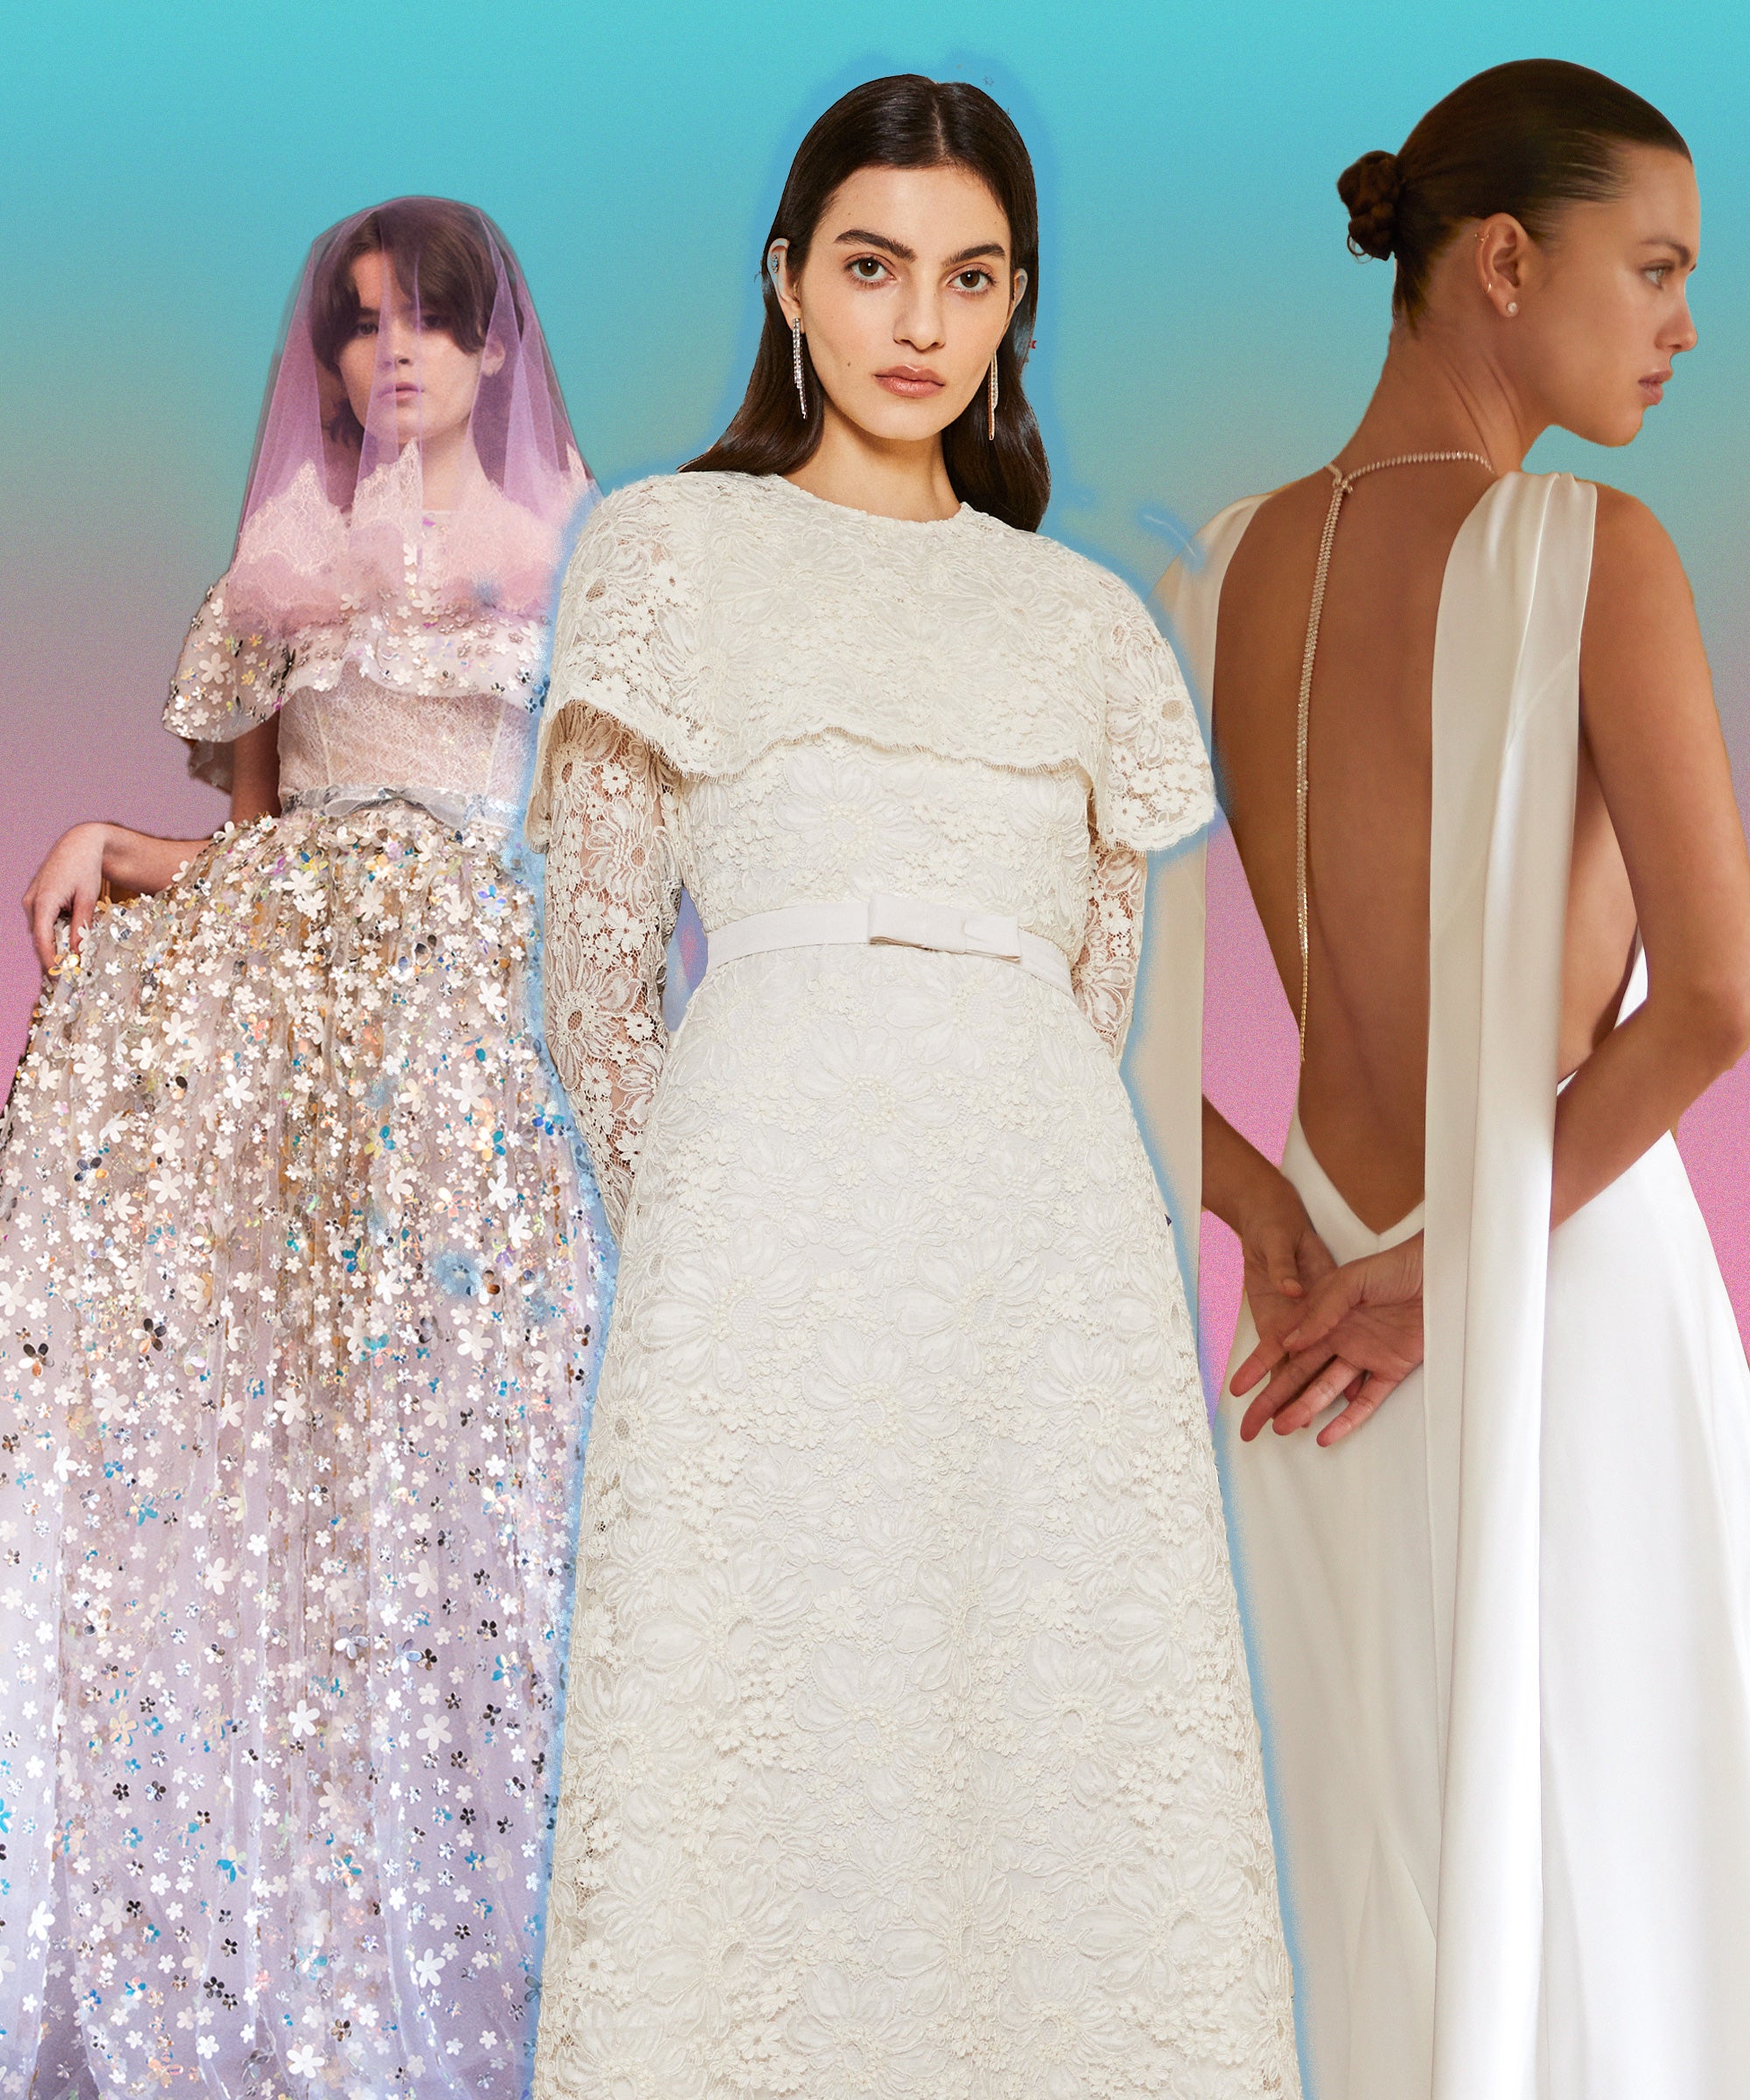 The 2023 Wedding Dress Trend on the Rise: High-Concept Gowns